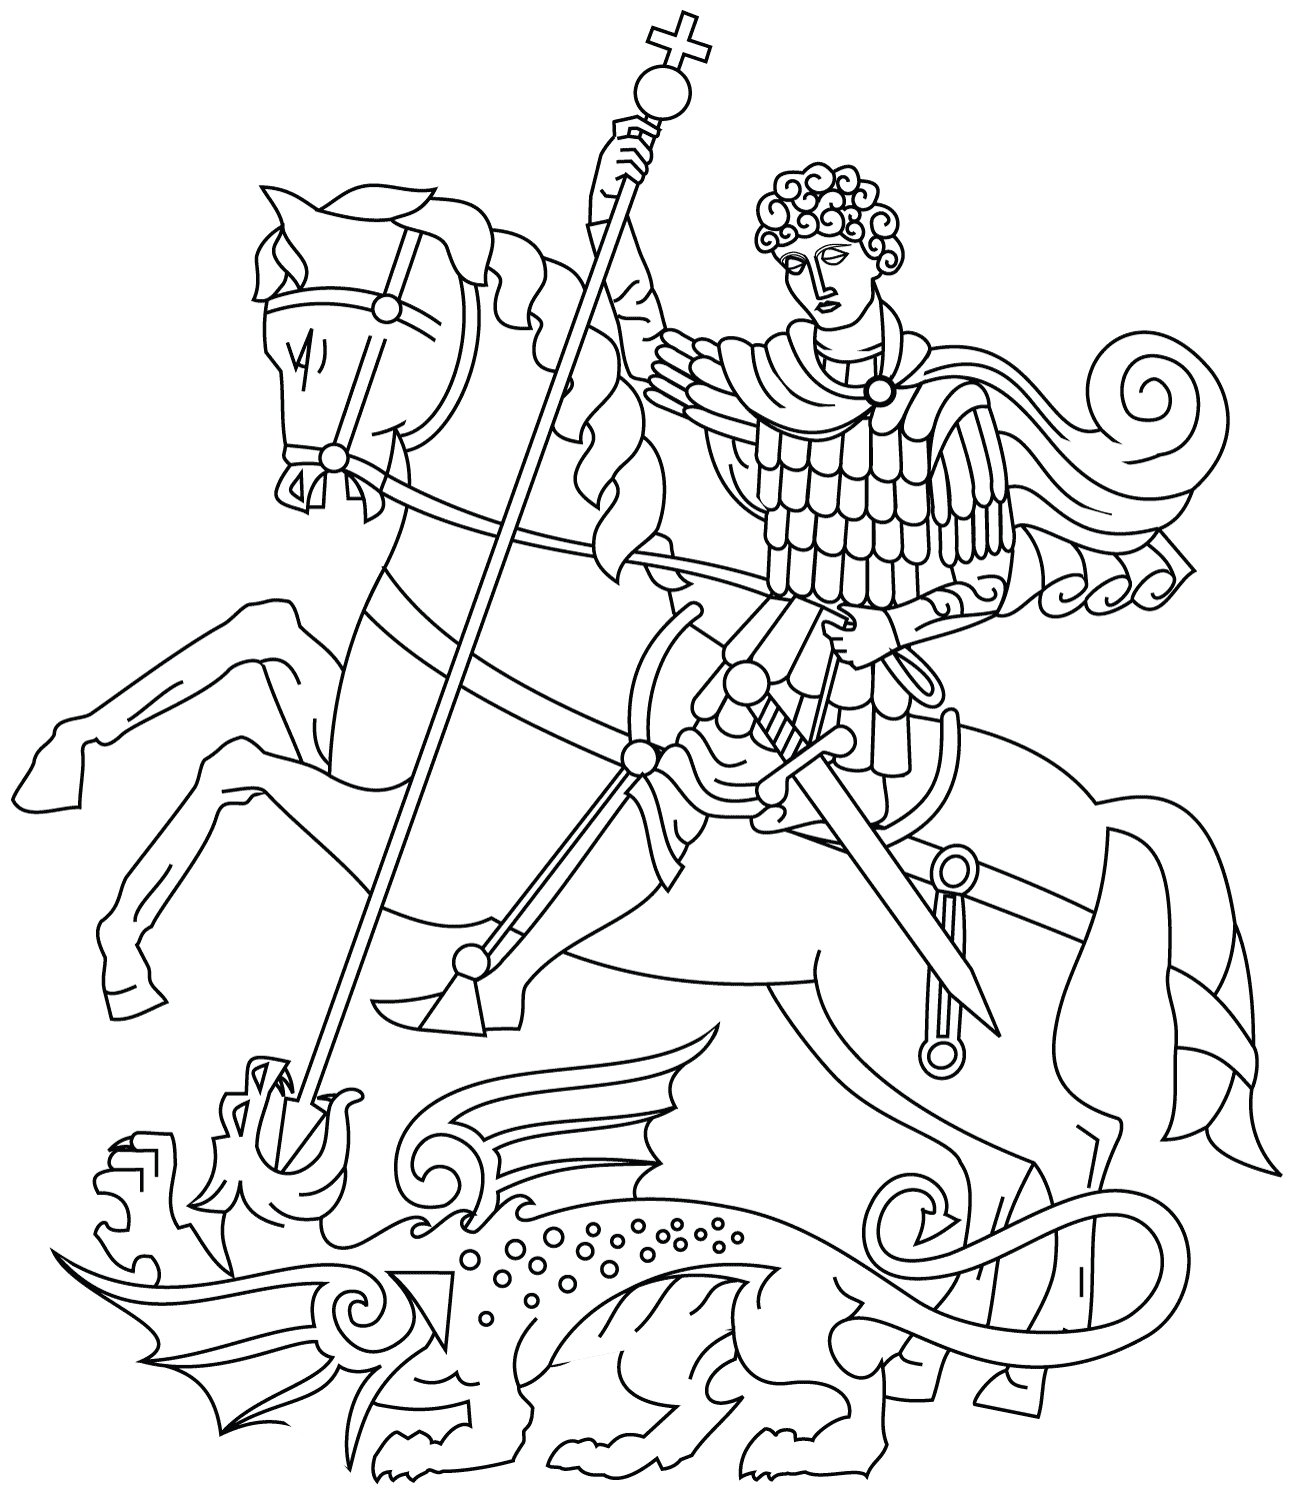 Saint George and the Dragon coloring page - ColouringPages